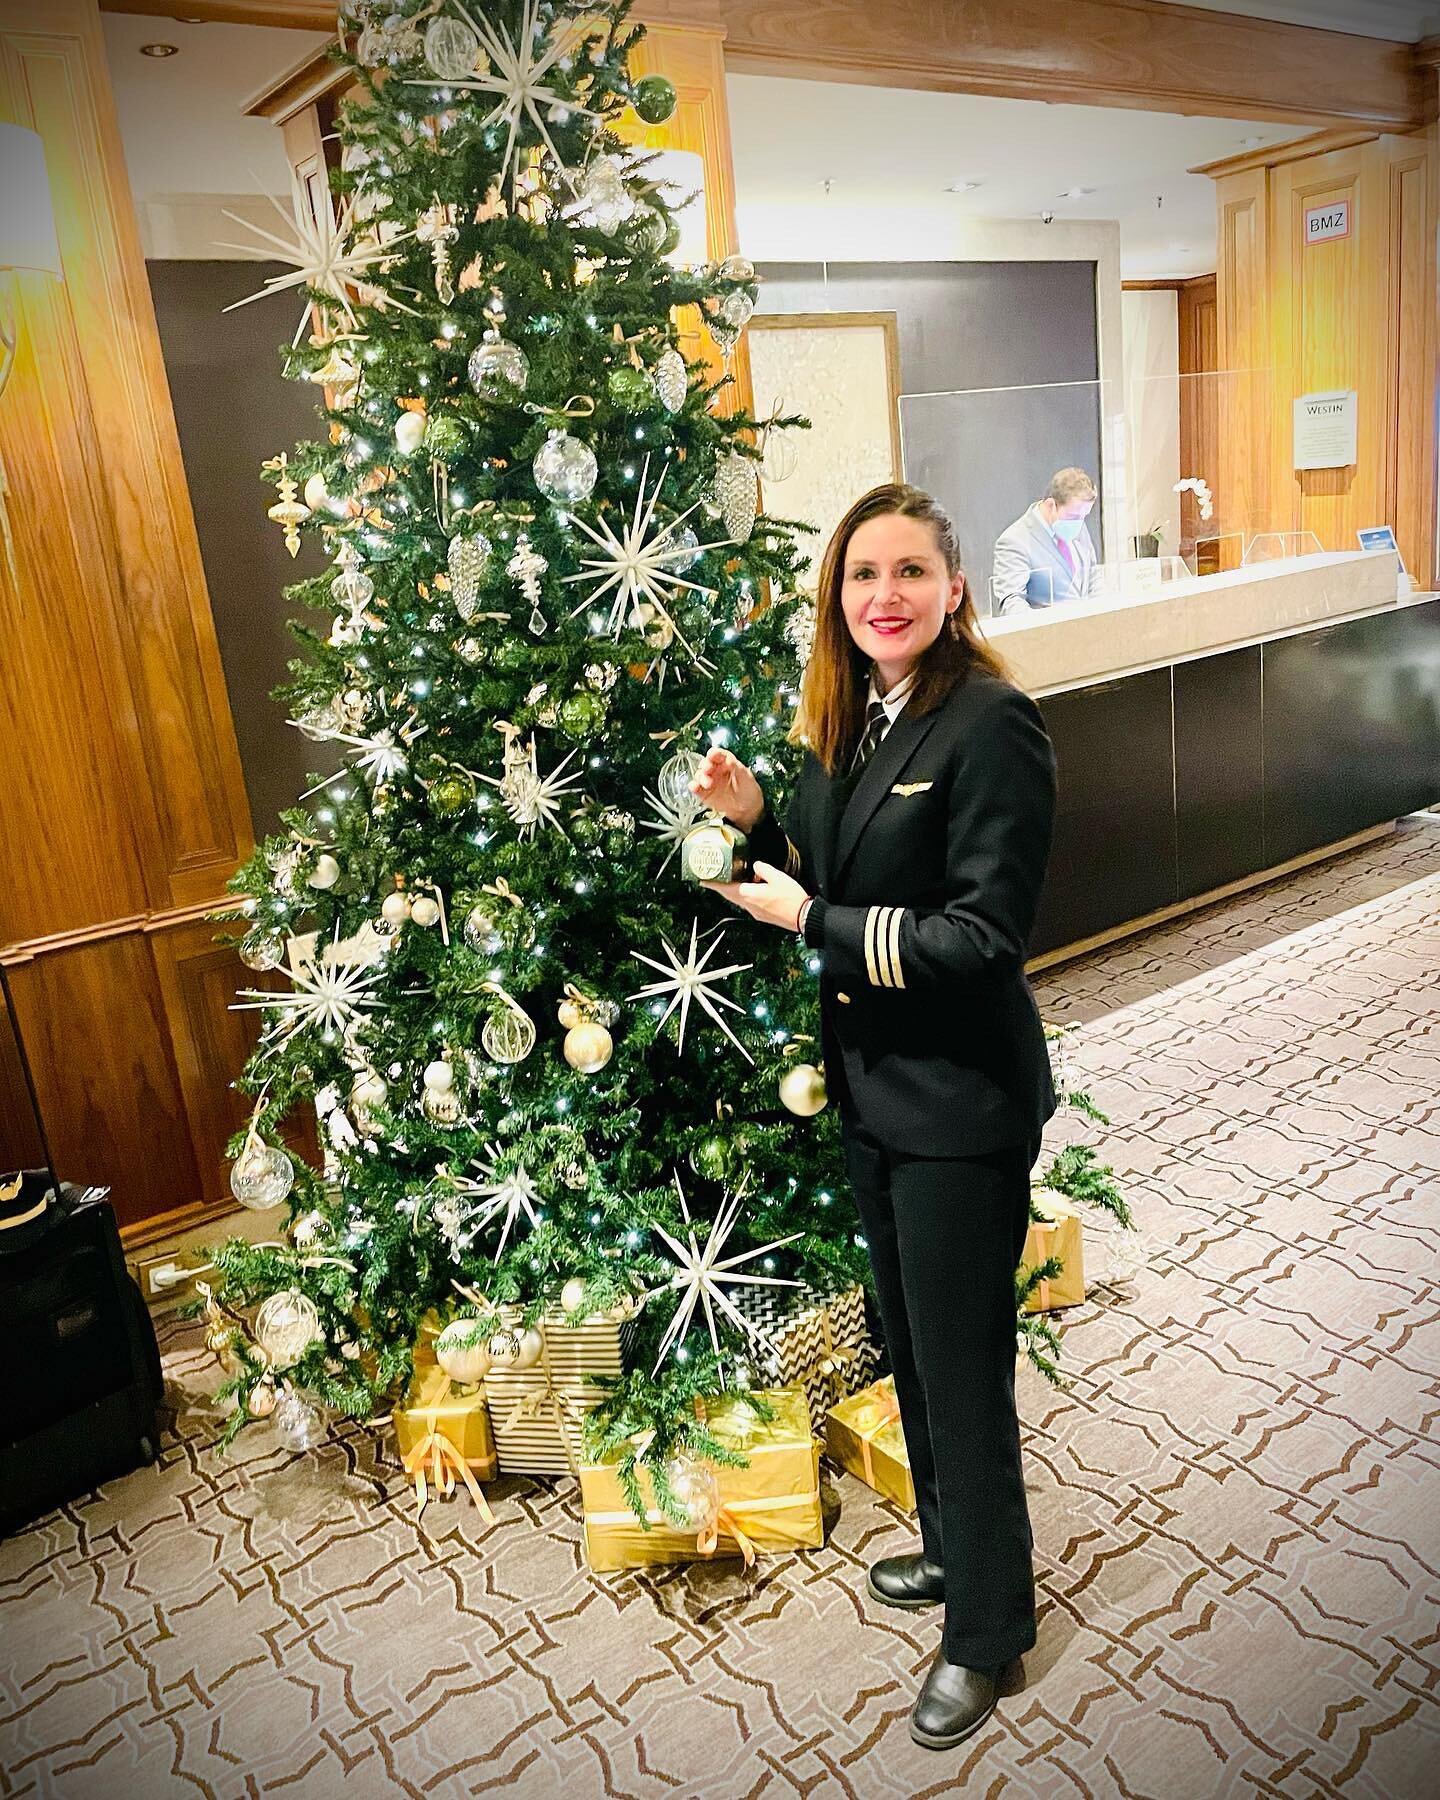 The hotel lobby in Berlin, Germany is Merry &amp; Bright!
All of our hotel room door handles were draped with chocolate boxes when we woke up! (I&rsquo;m holding the chocolate box). ✈️ 👩&zwj;✈️

#travel #adventure#aviation #aviatrix #pilotlife #chri